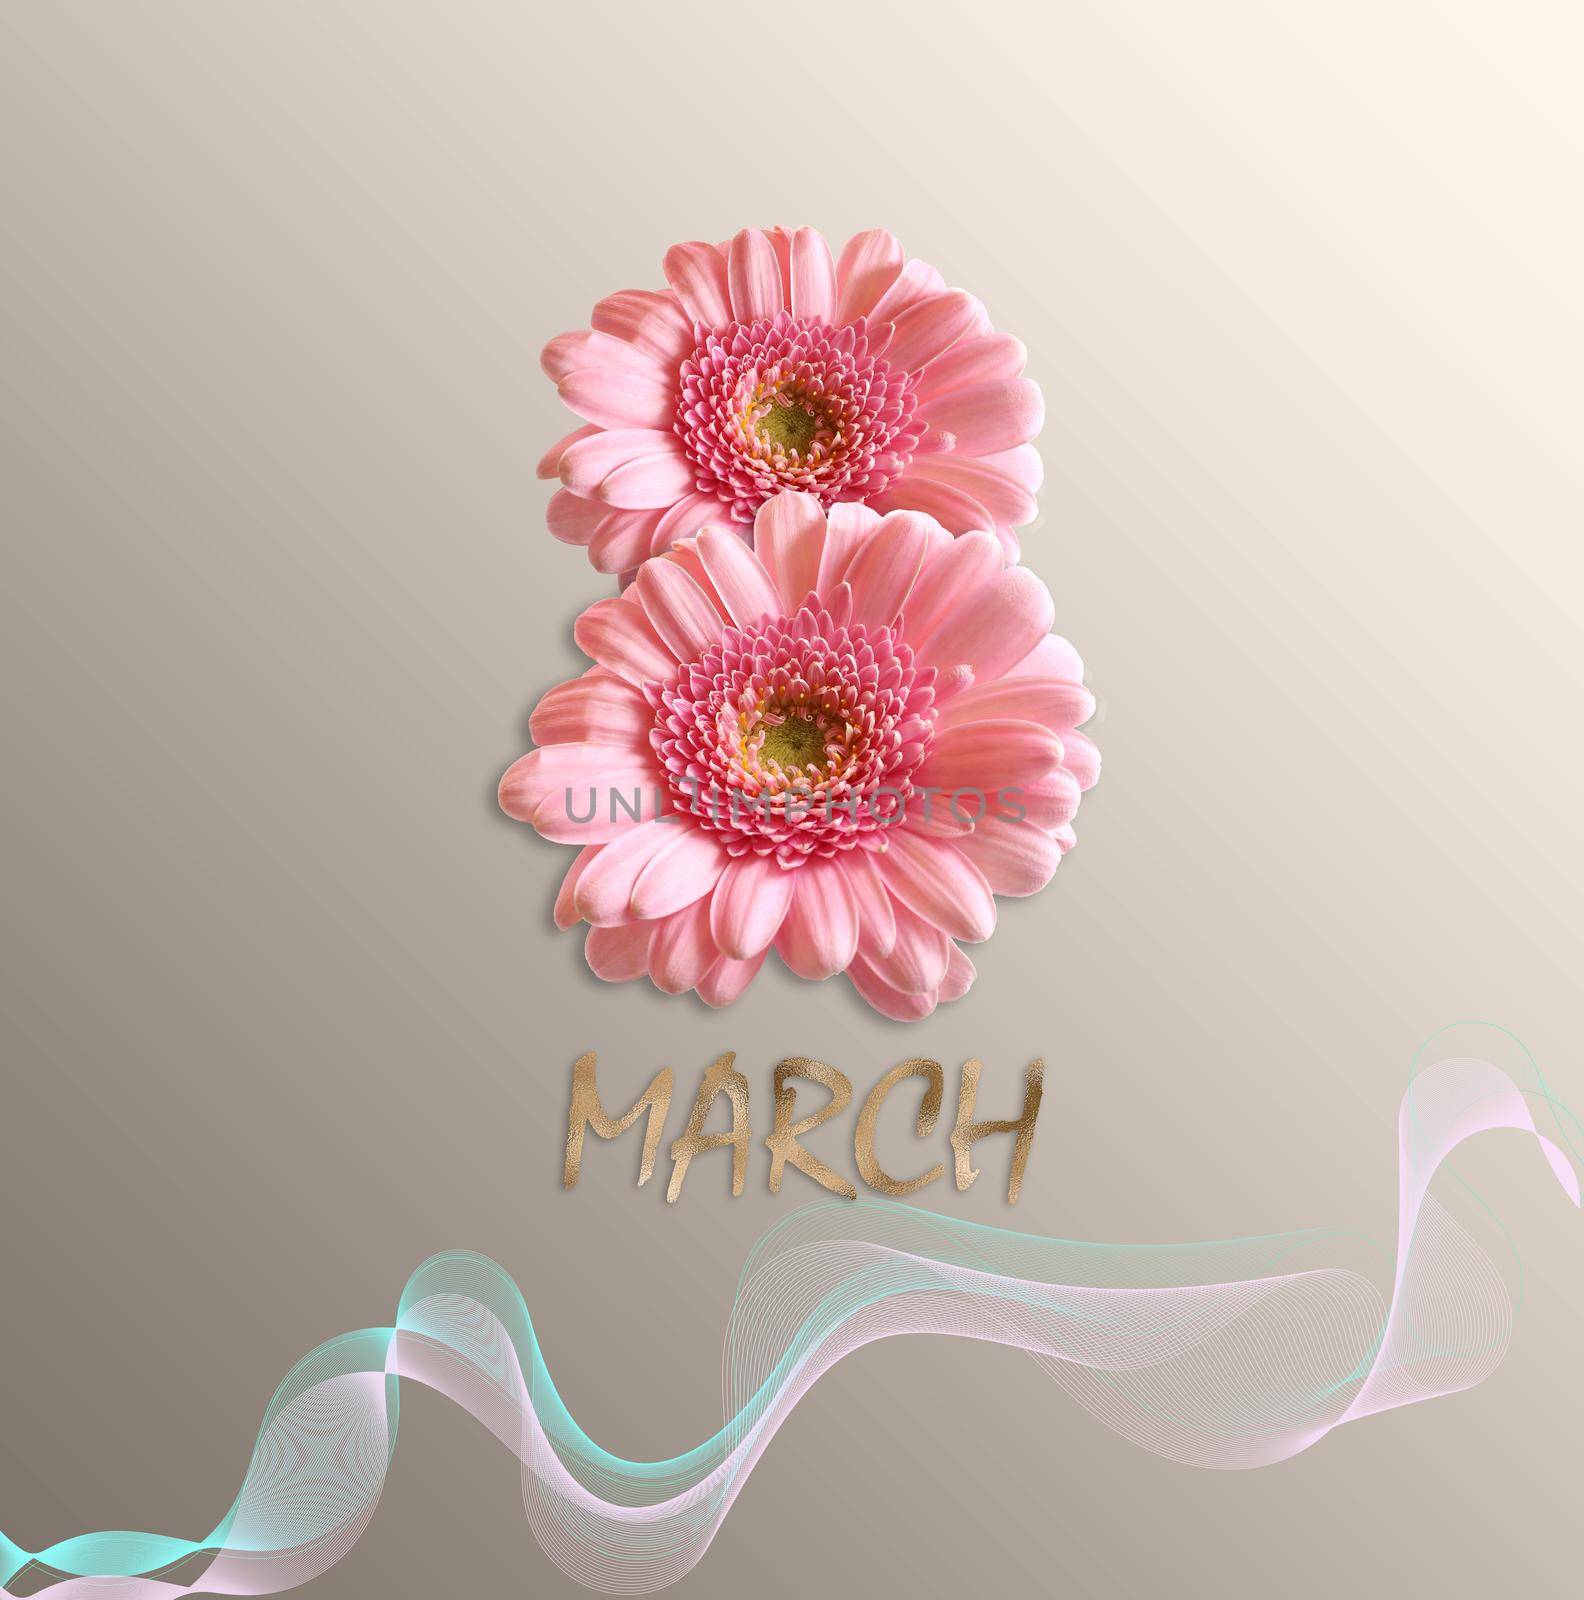 8th March, Women's day design of pink flowers gerbera. Gold text March on pastel gold background